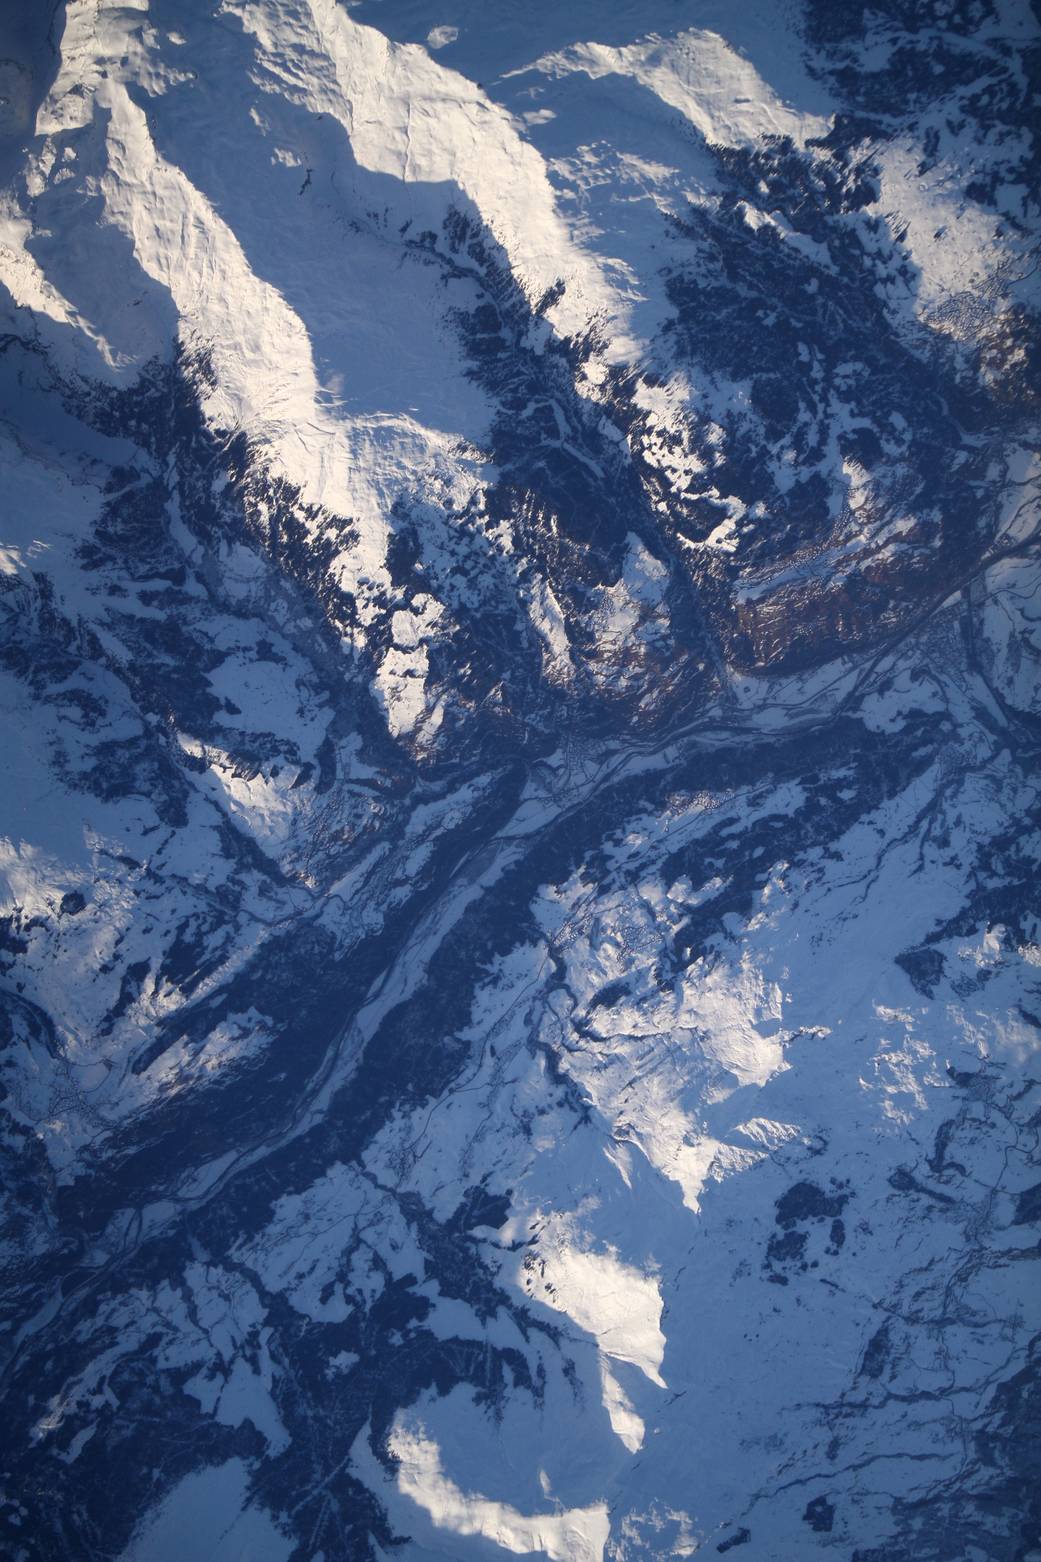 SERVIR's ISERV Camera Image of Swiss Alps from Space Station